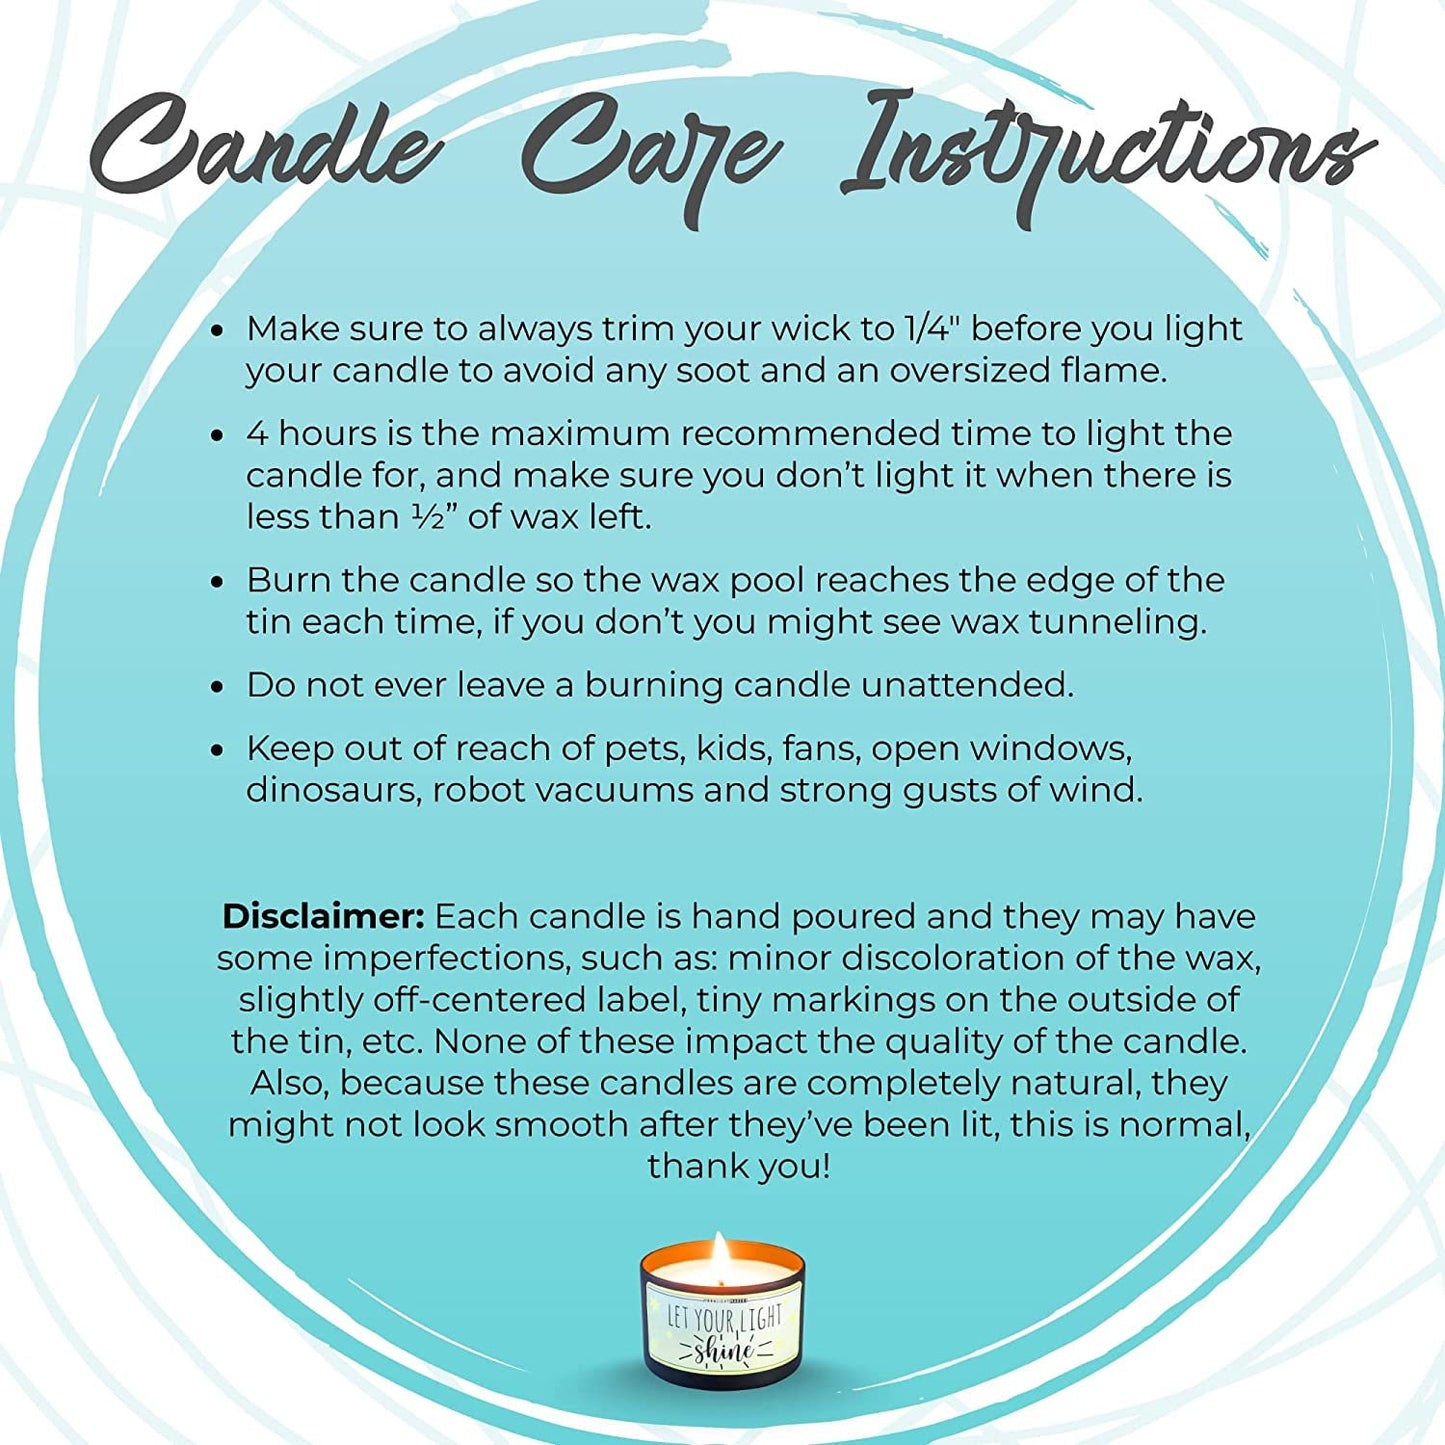 Stop Trying To Make Everyone Happy, You Aren't Tequila - 8oz Candle - Choose Your Scent - 100% Natural Soy Wax